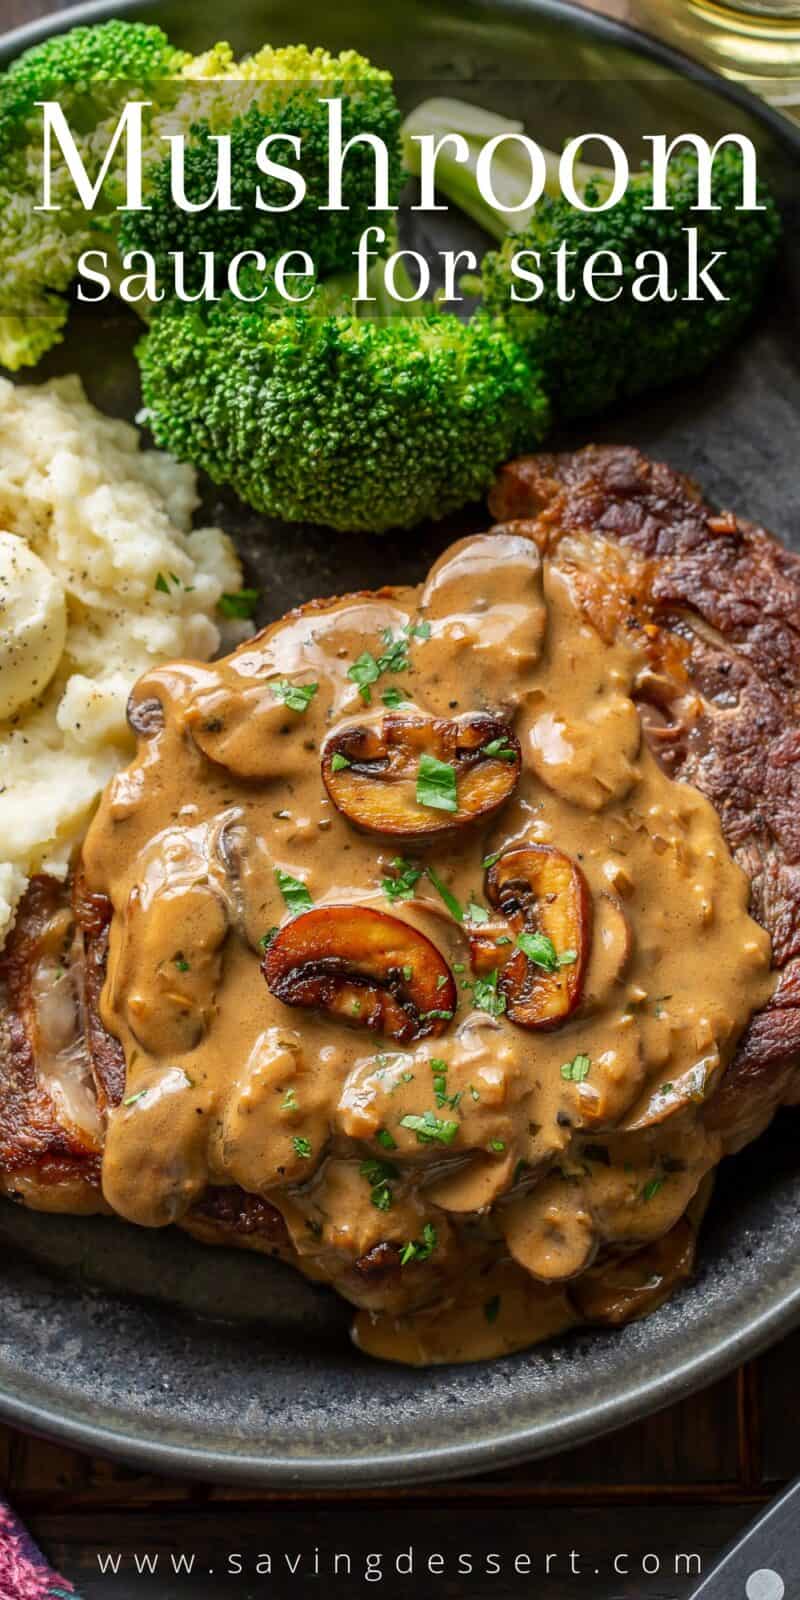 Overhead view of a plate with steak, mashed potatoes, broccoli and mushroom sauce